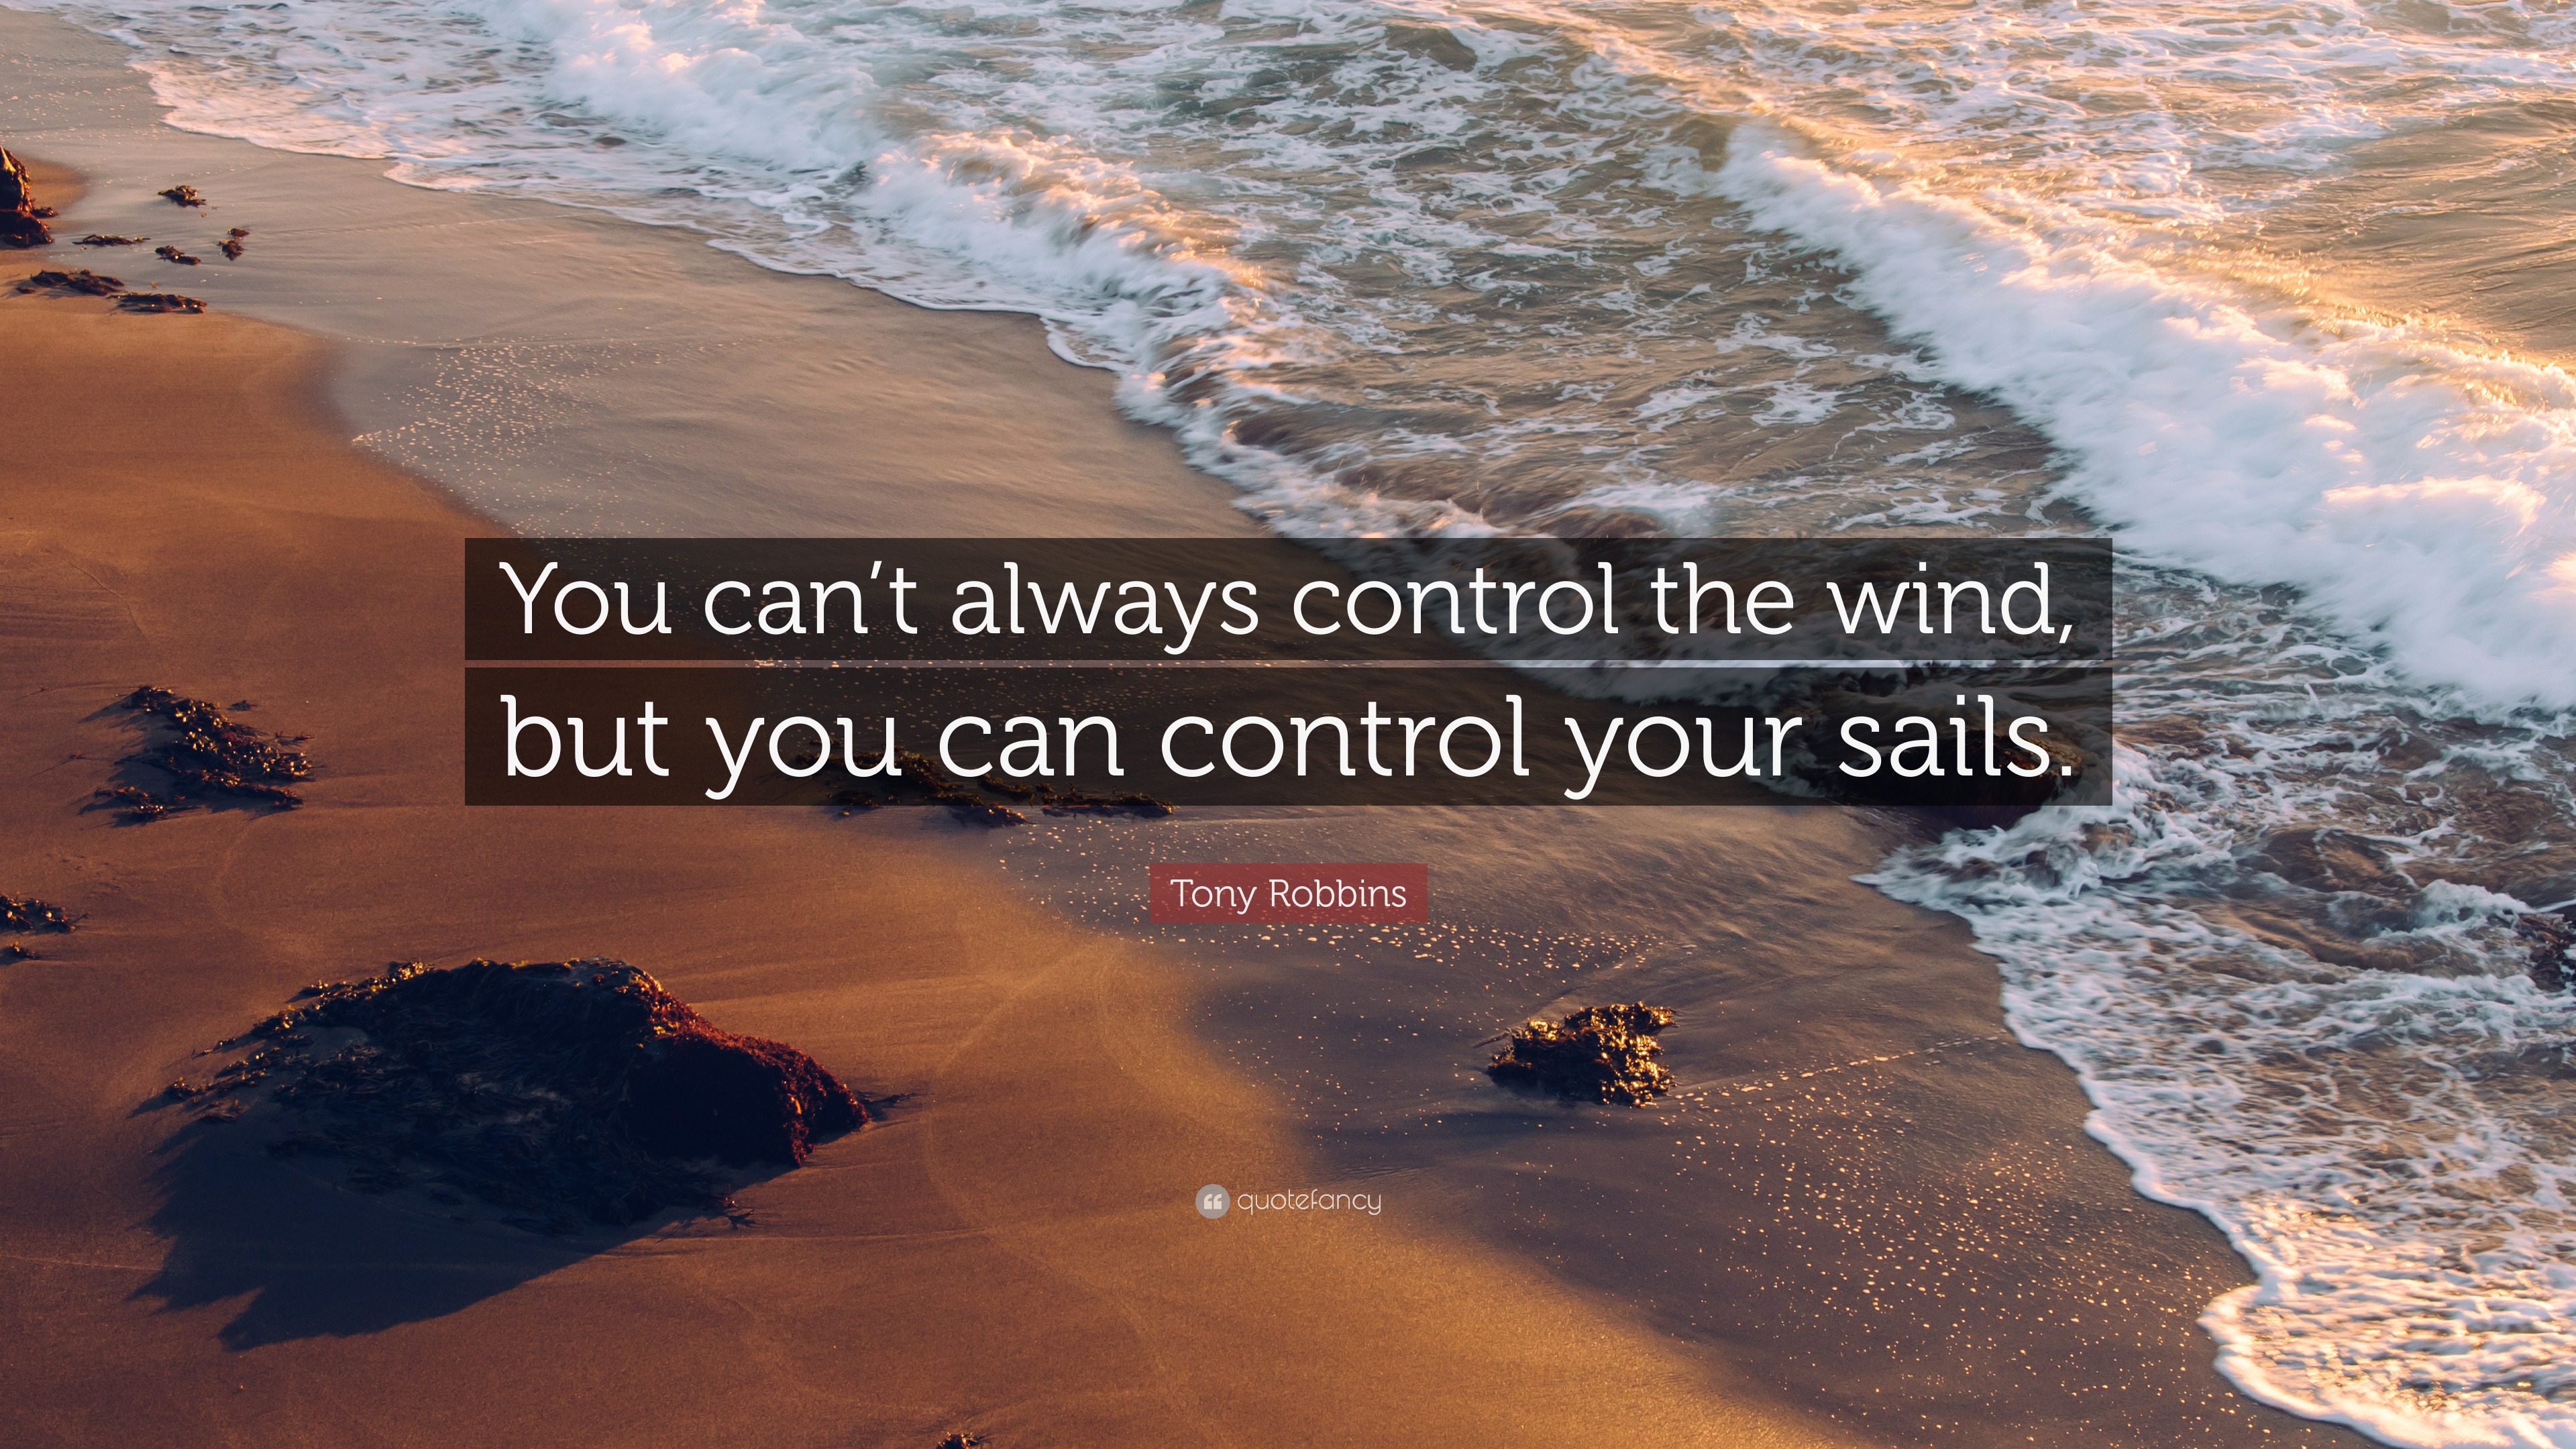 Tony Robbins Quote: “You can’t always control the wind, but you can ...